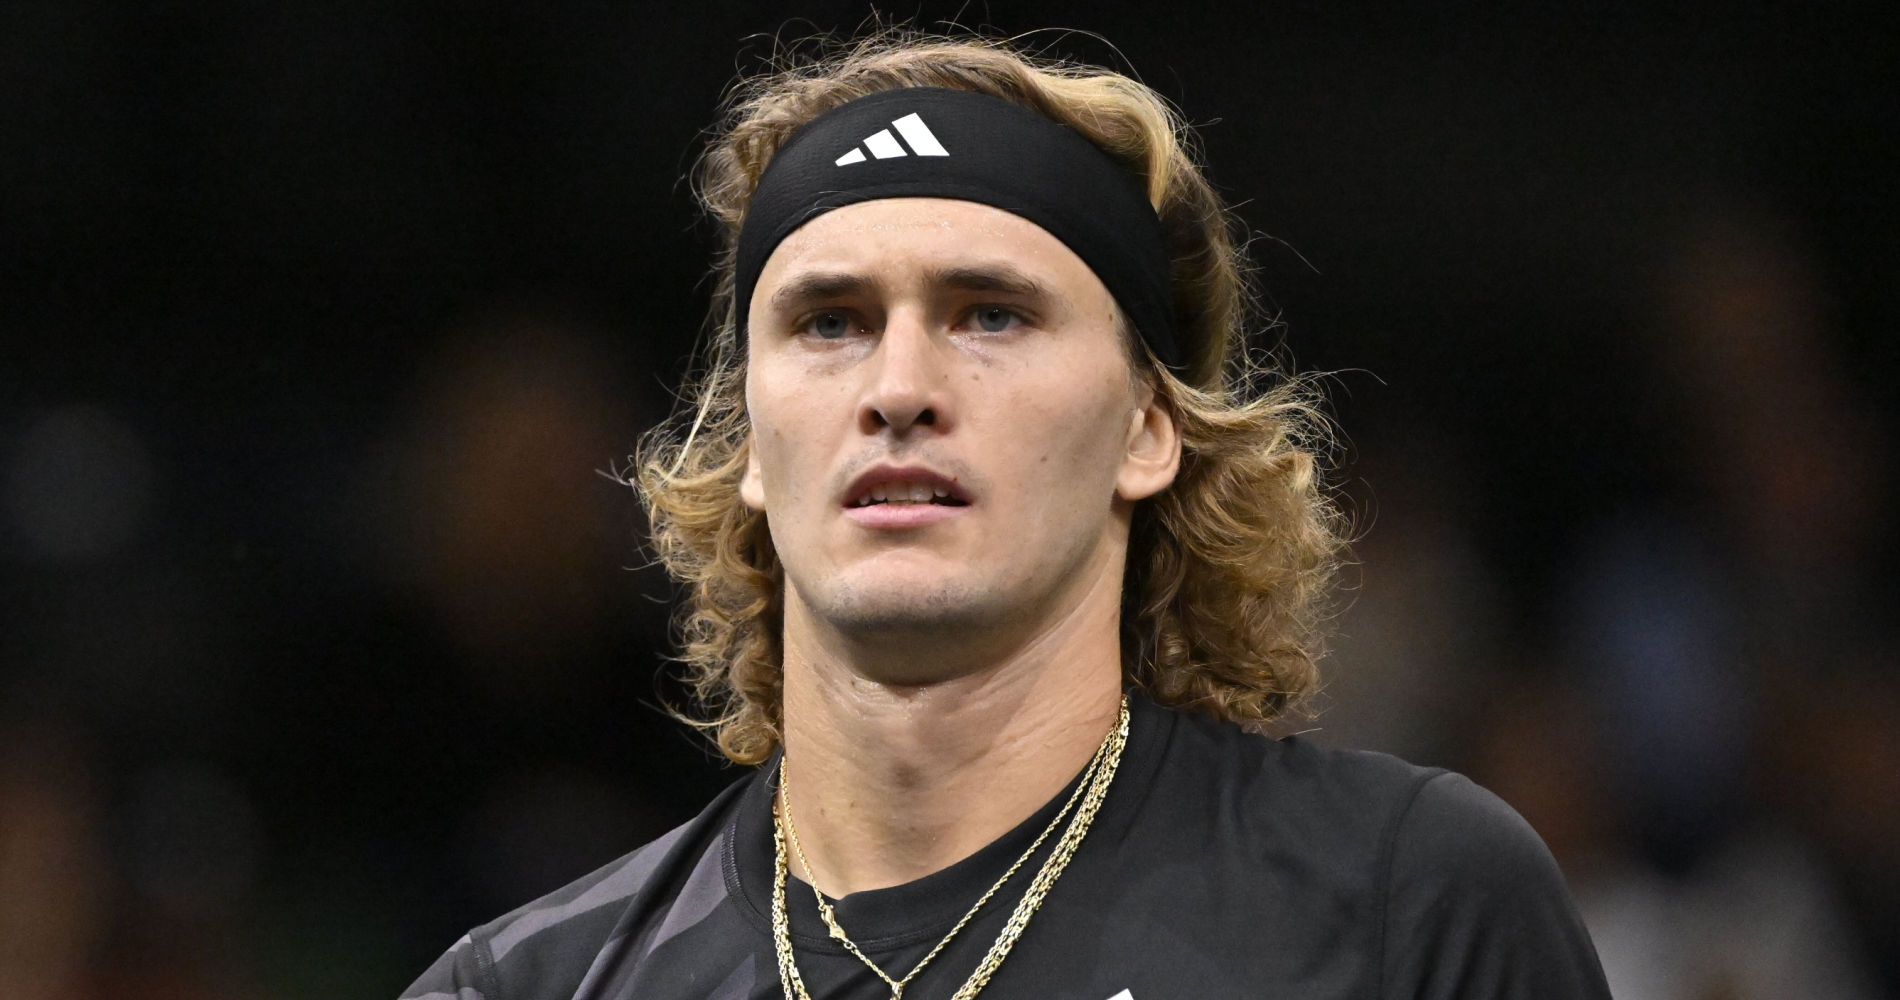 Players take the no-comment stance on Zverev trial